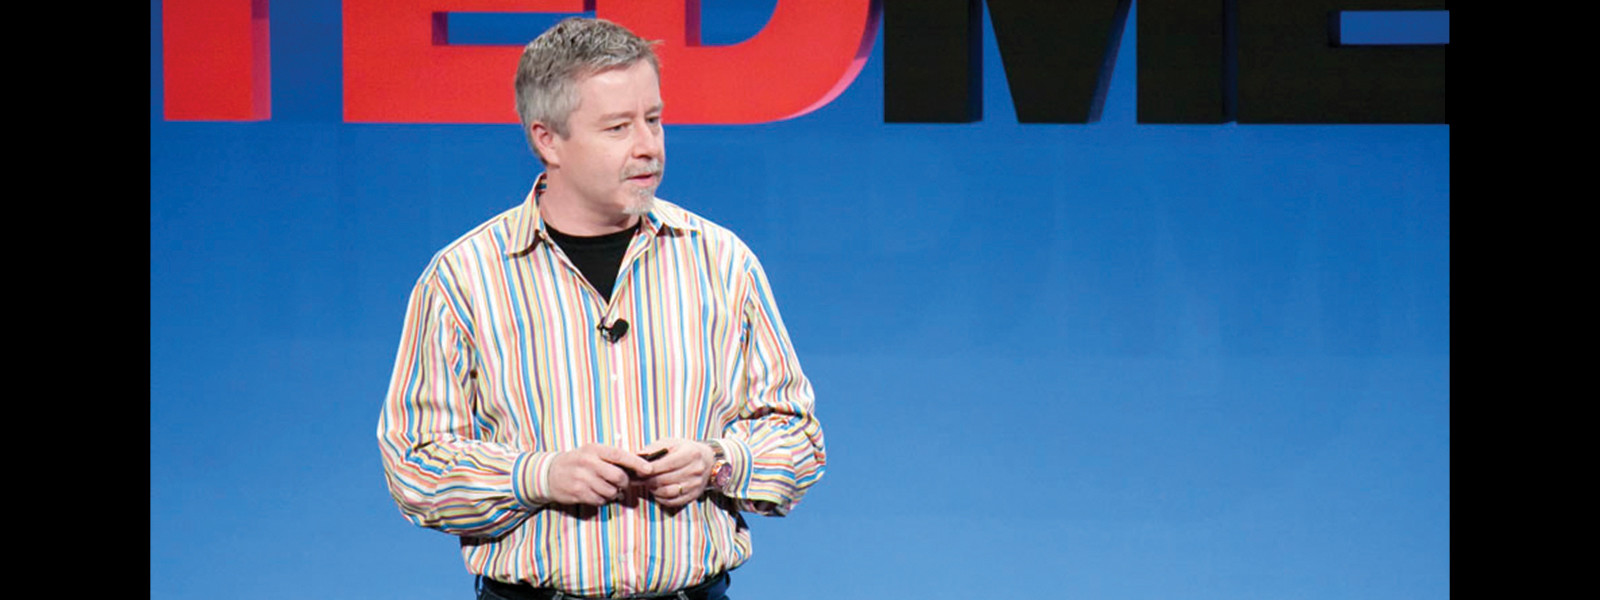 TEDMED - - What happens with a design approach to healthcare?